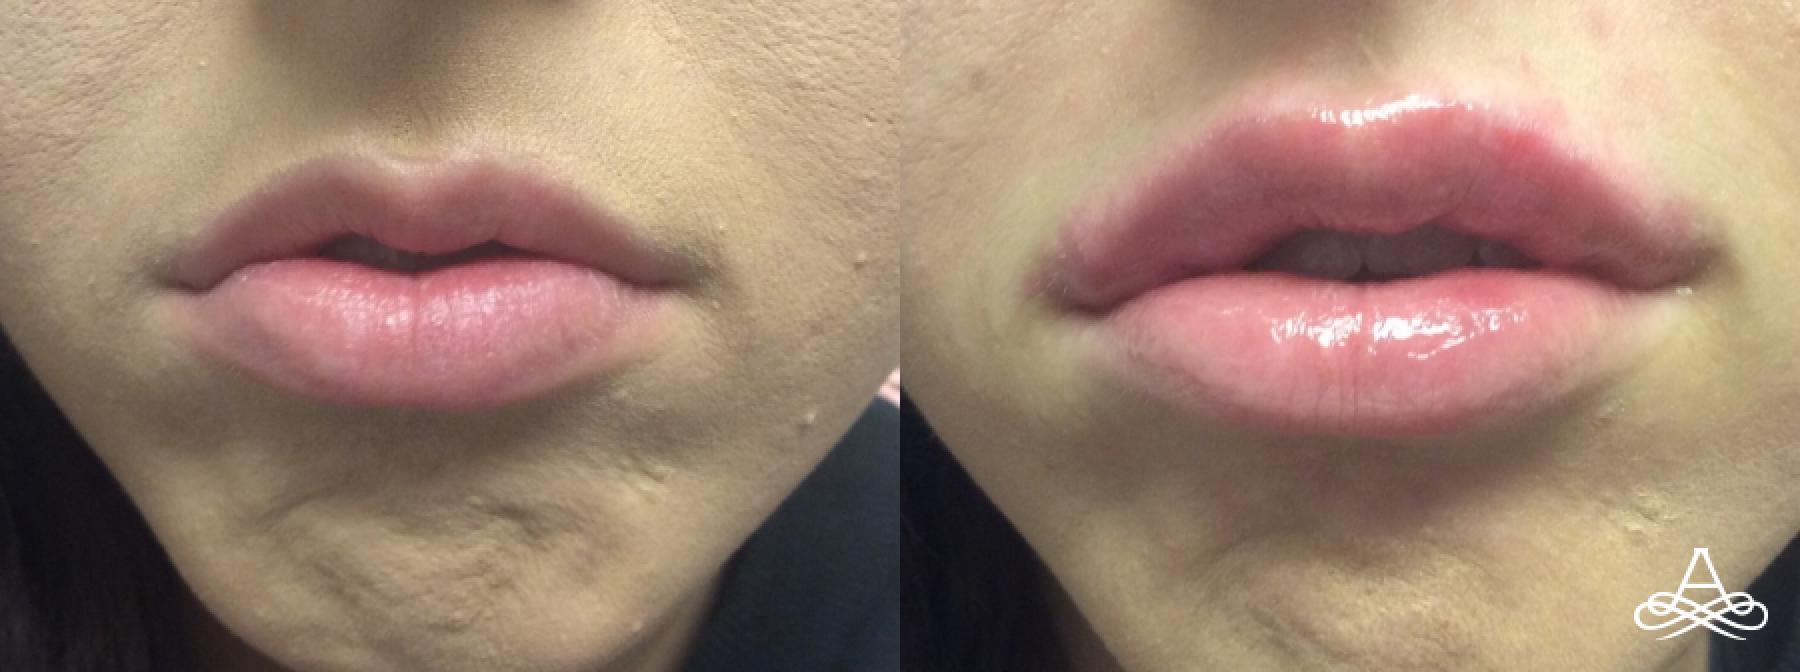 Lip Filler: Patient 5 - Before and After  